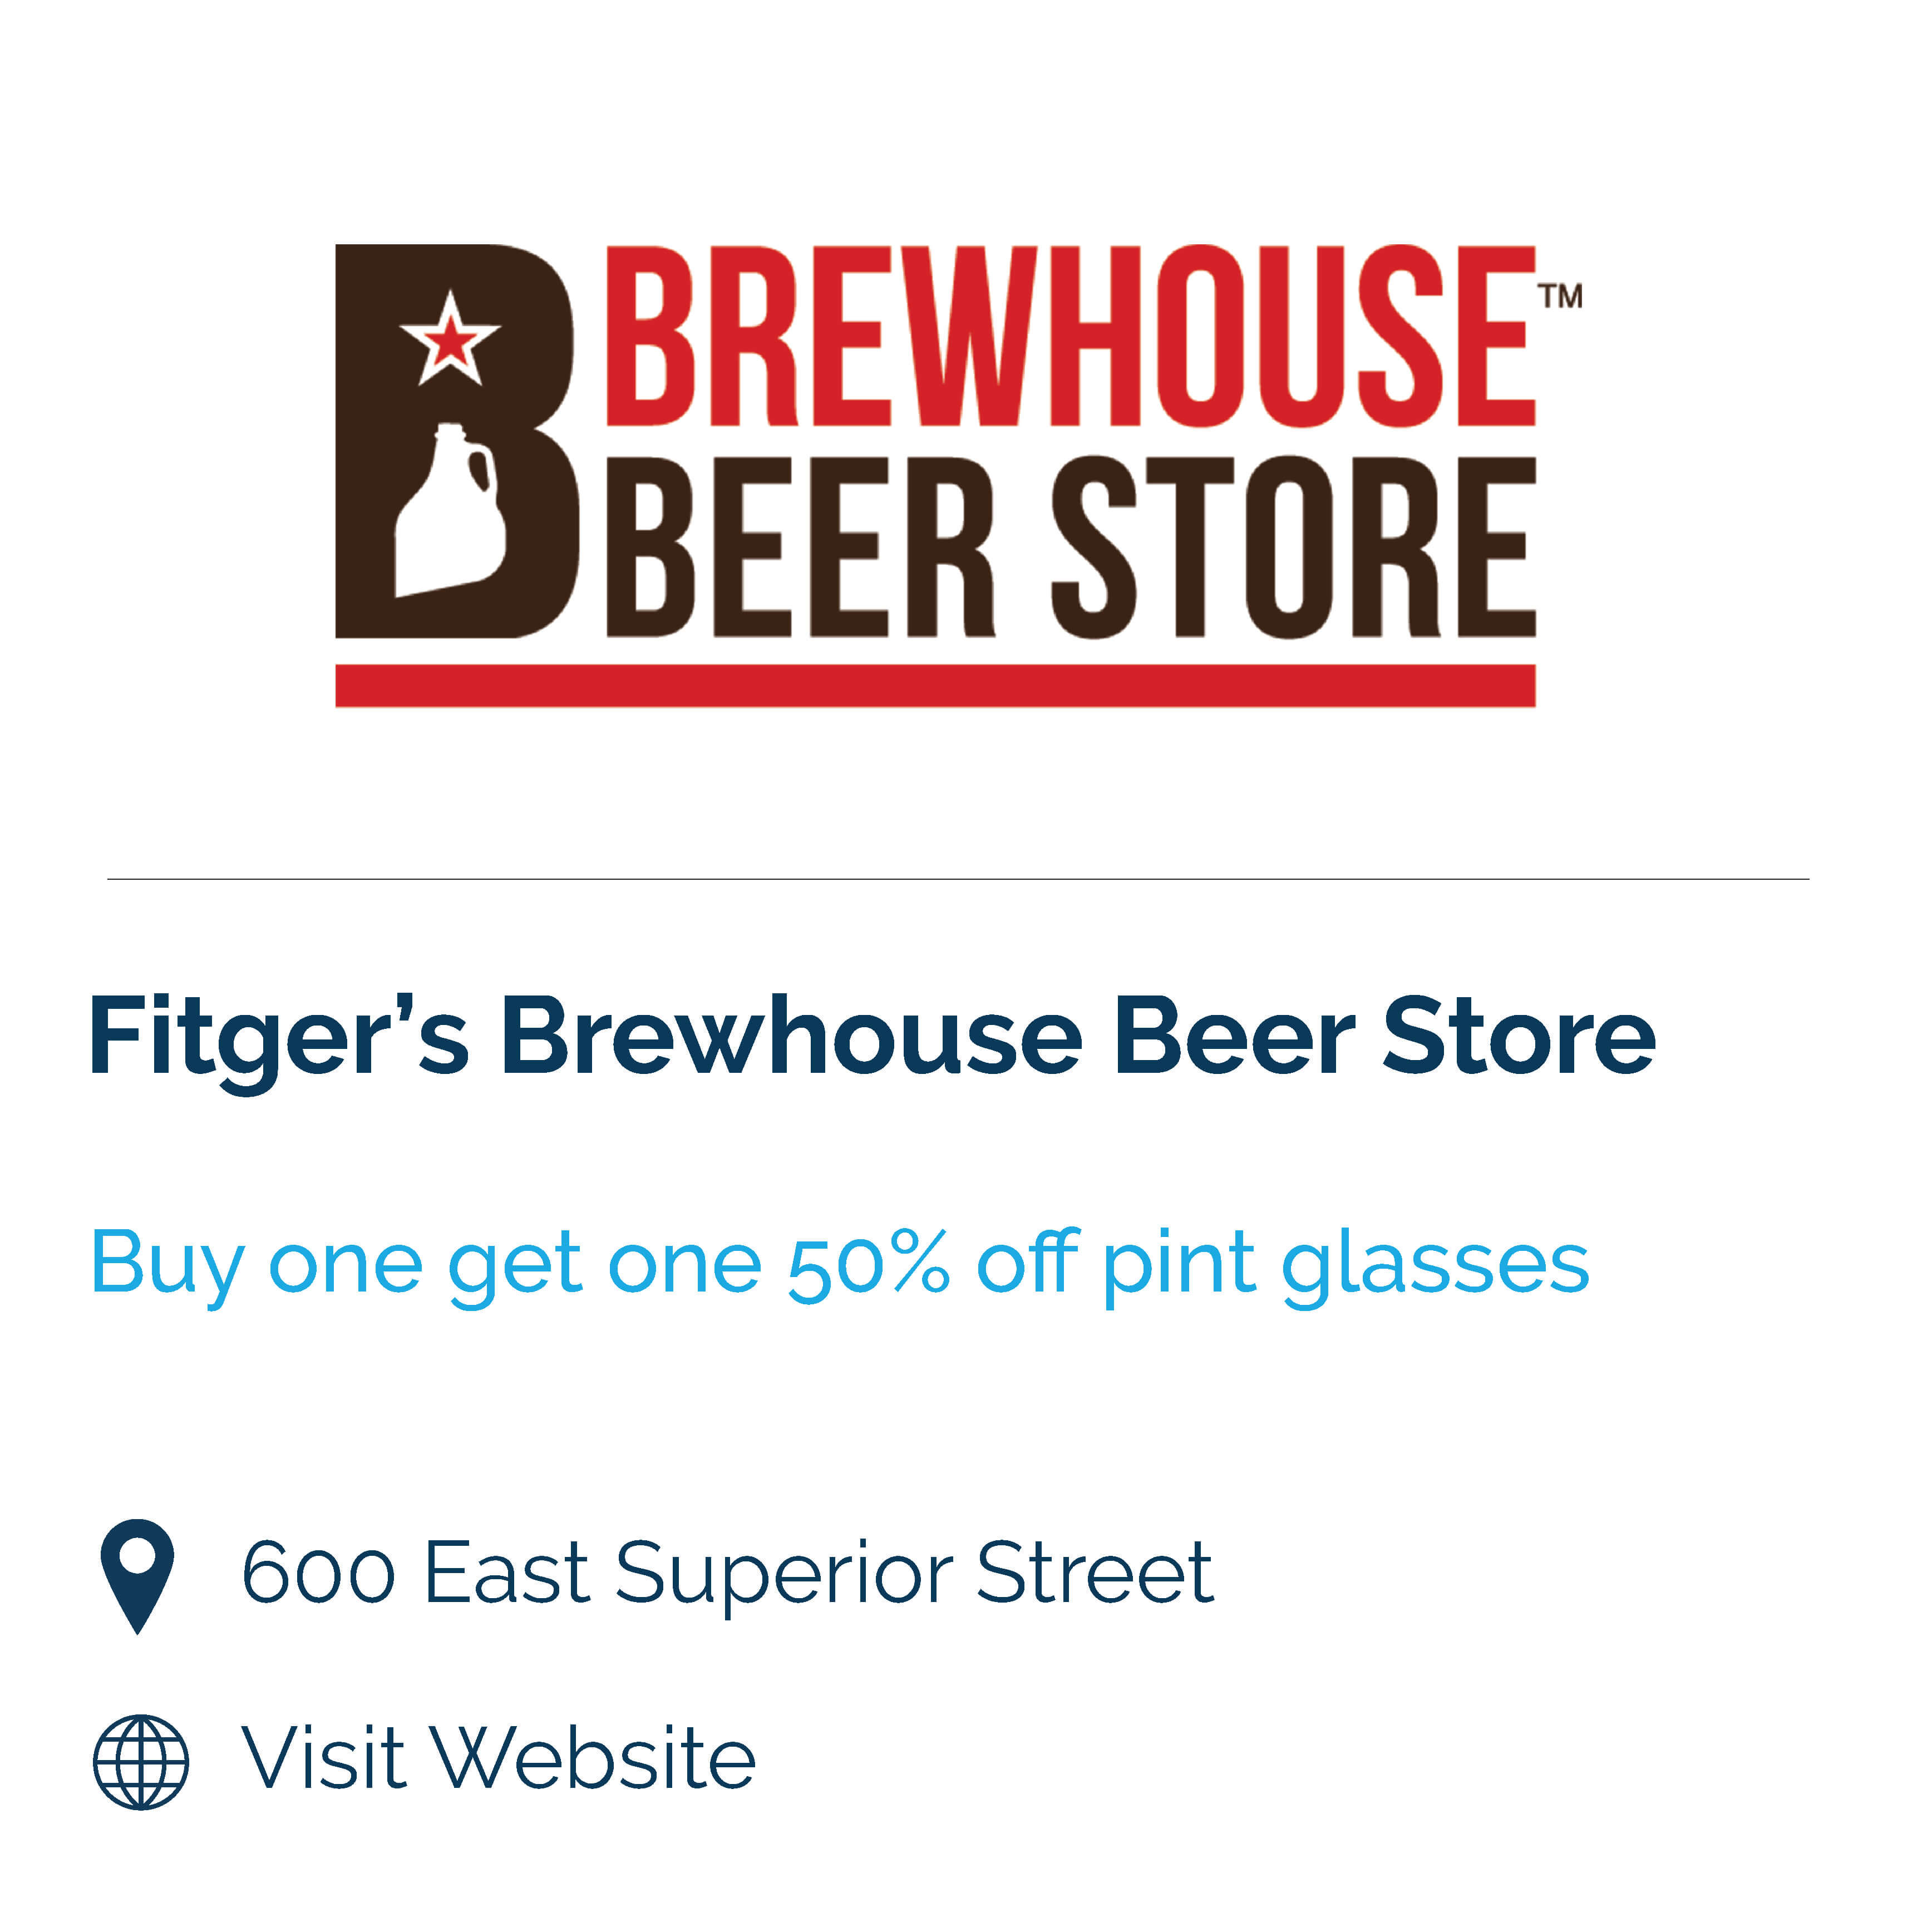 fitgers beer store. buy one get one 50% off pint glasses. 600 east superior street